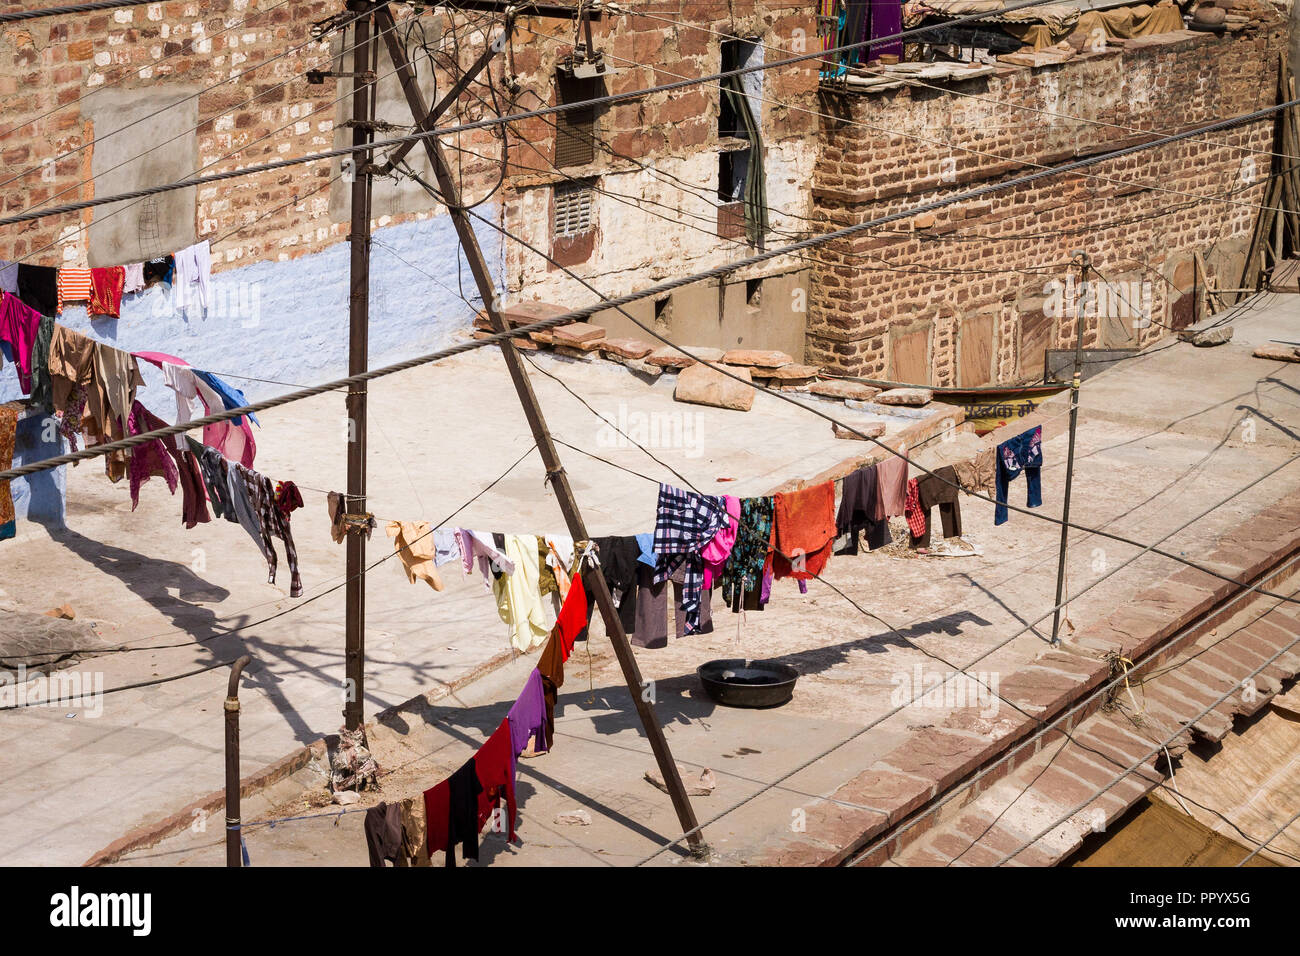 Looking down on washing line filled with clothes in Jodhpur Stock Photo